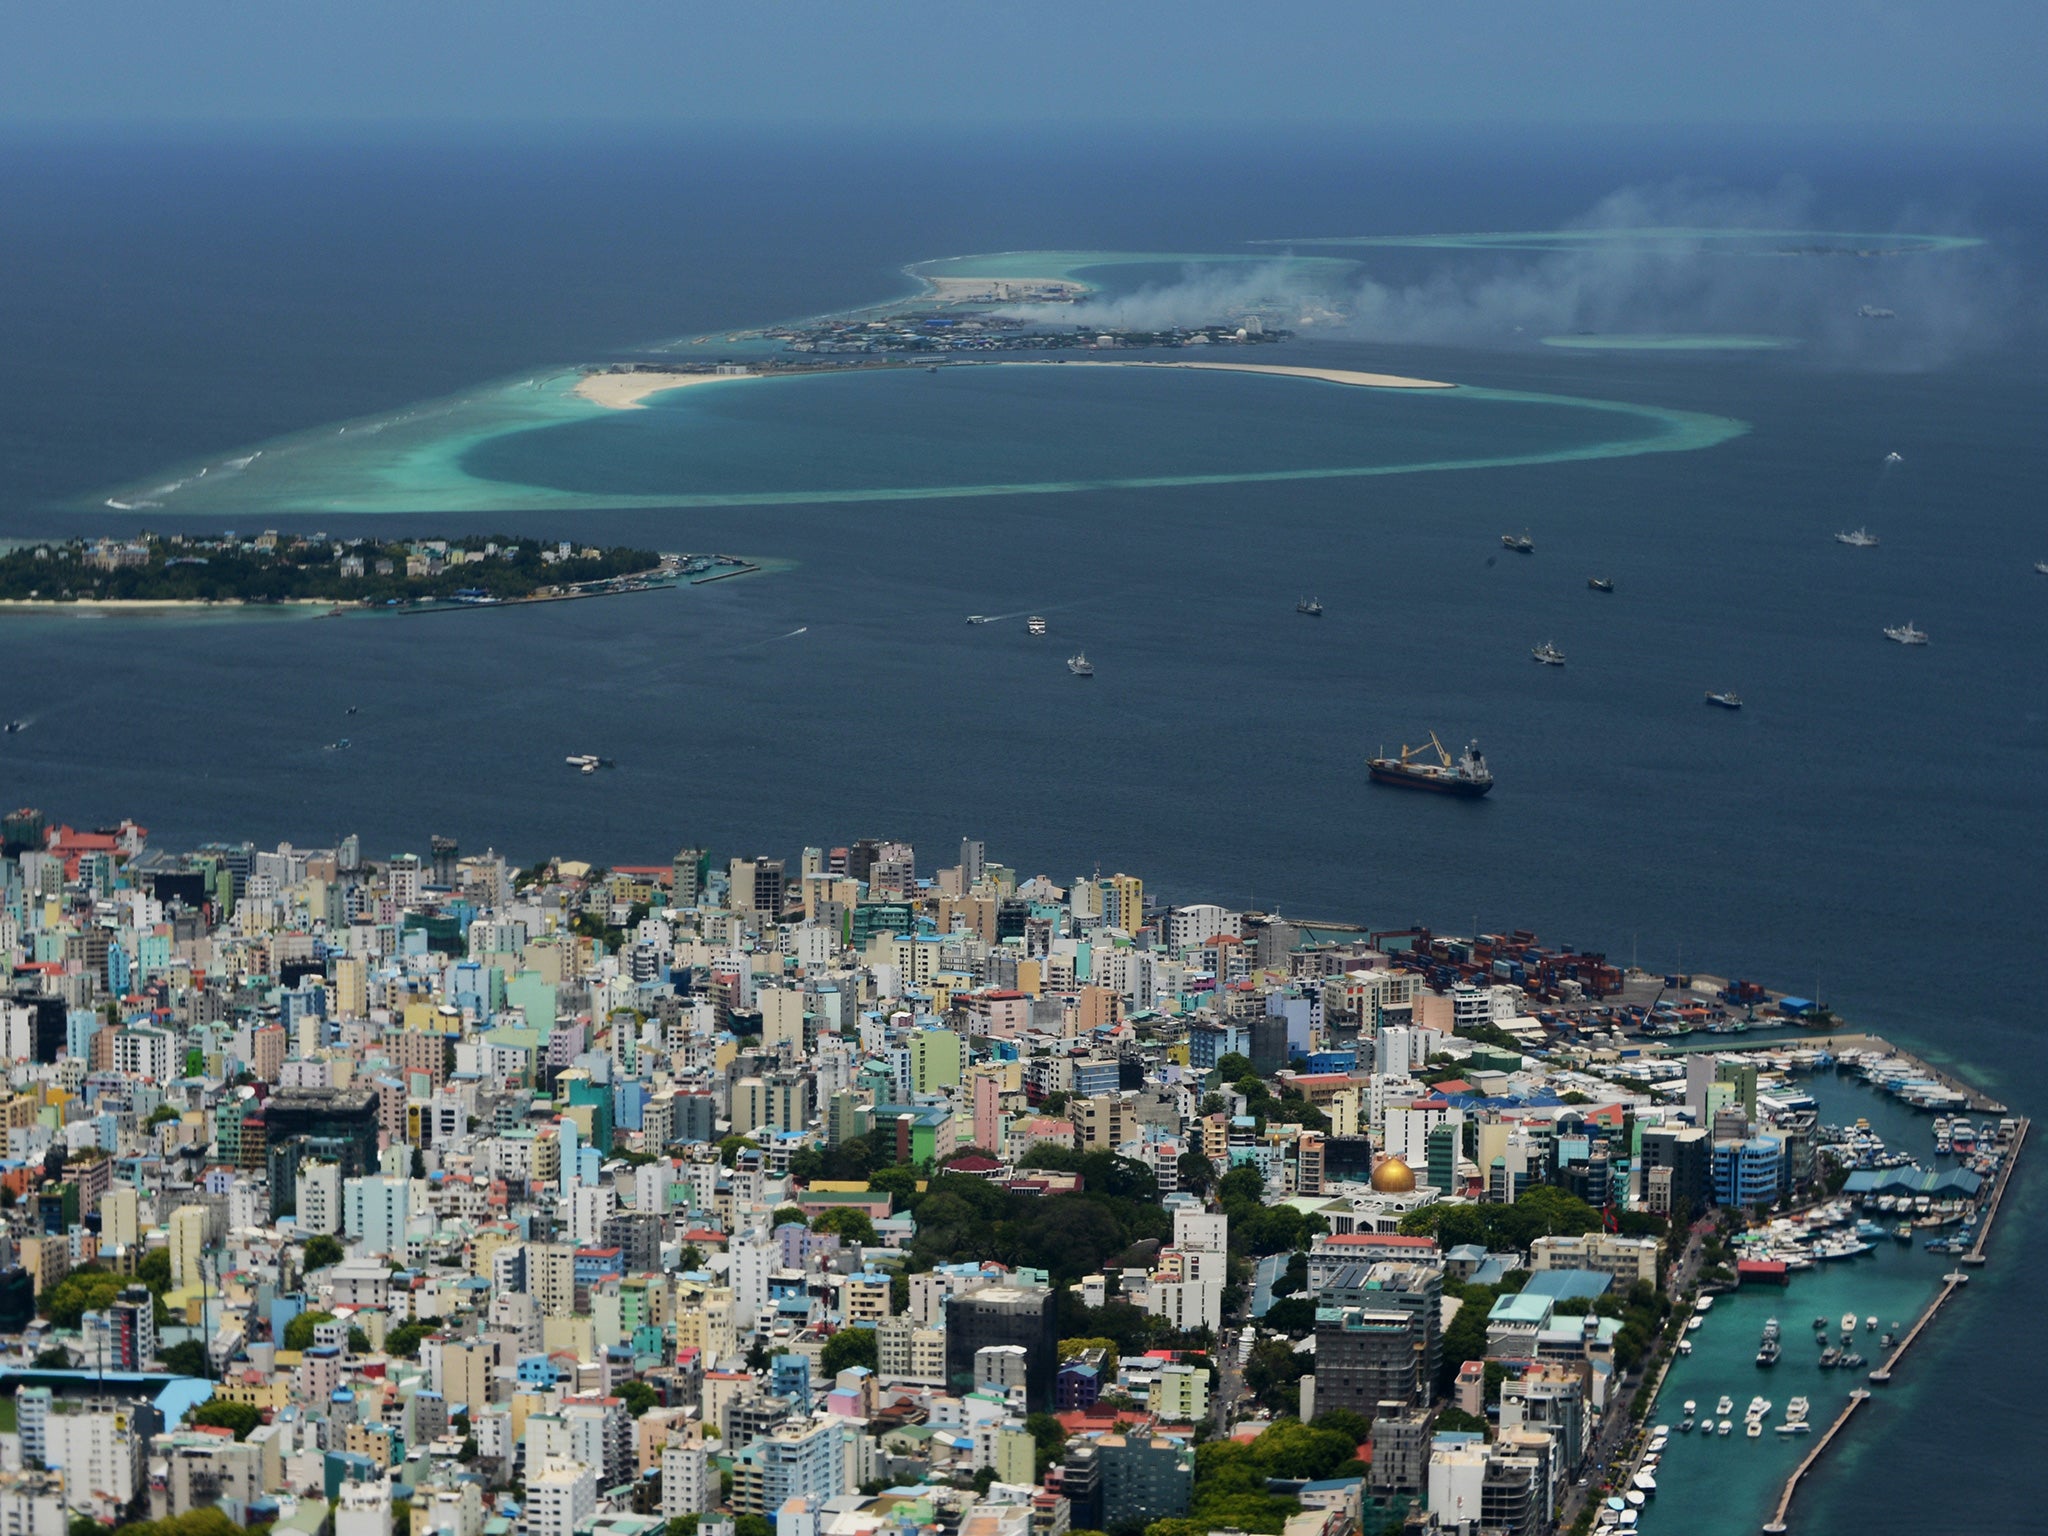 The Maldives is an island nation with a population of around 350,000